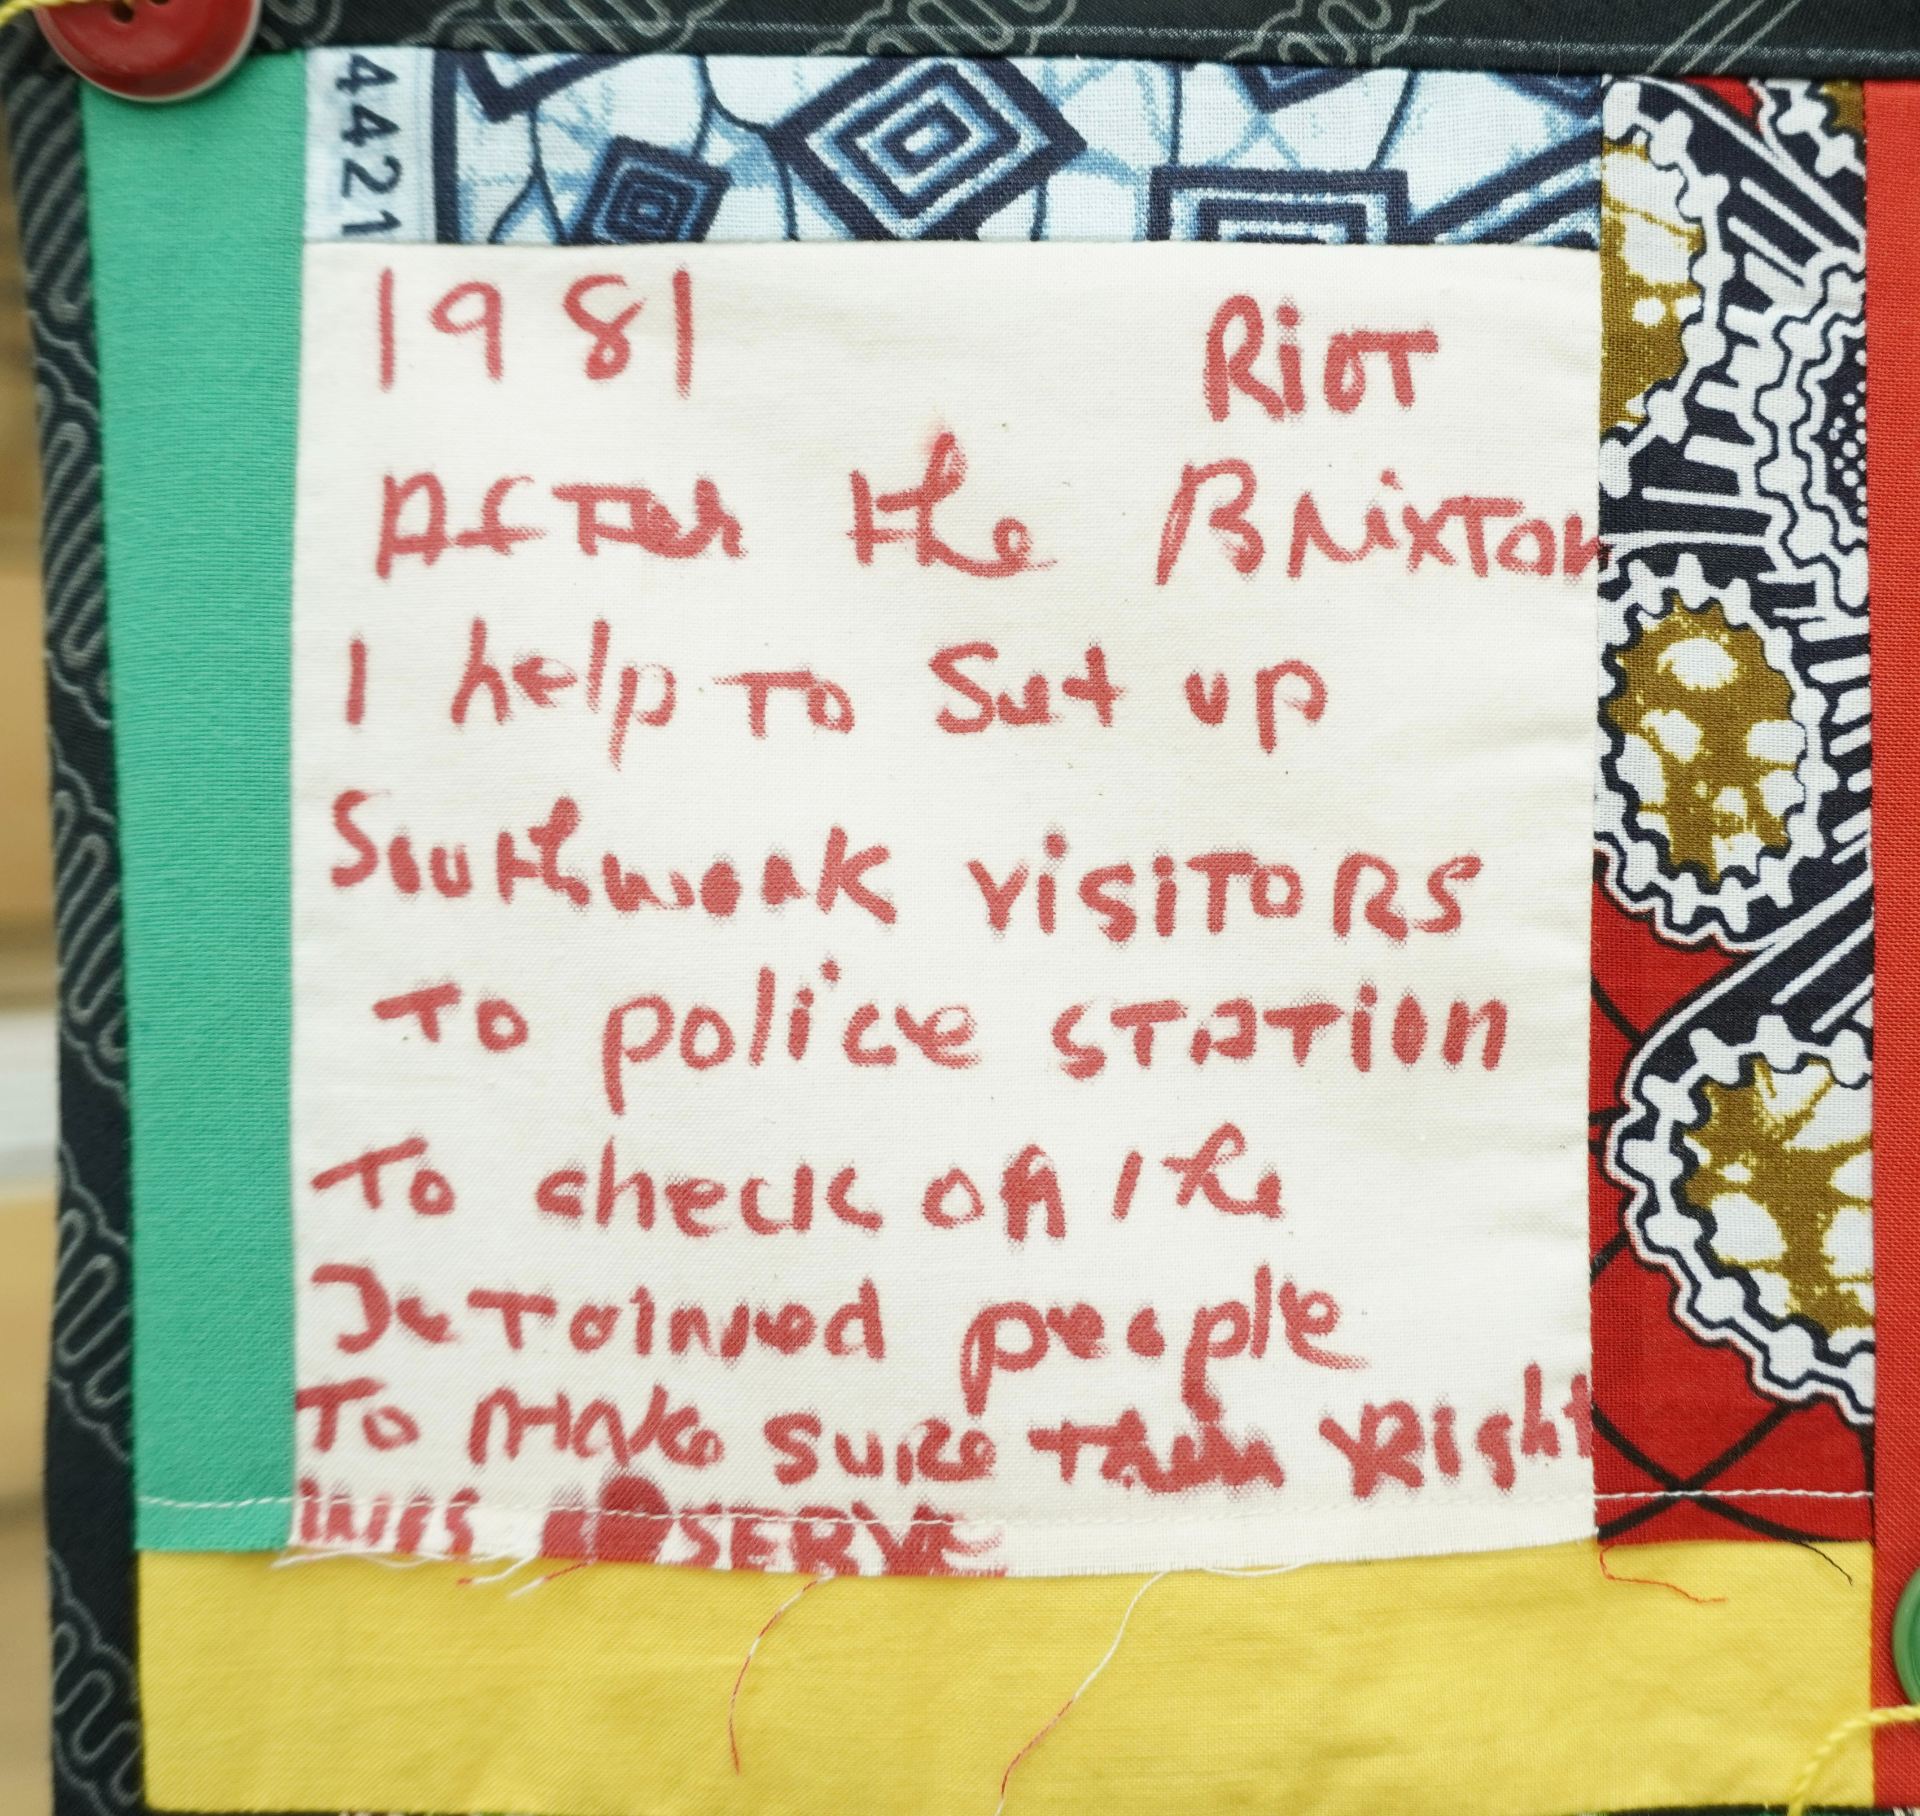 Commemorative quilt. Text reads, '1981 After the Brixton riot I help to setup Southwark visitors to police station to check on the detained people to make sure their right was reserved'